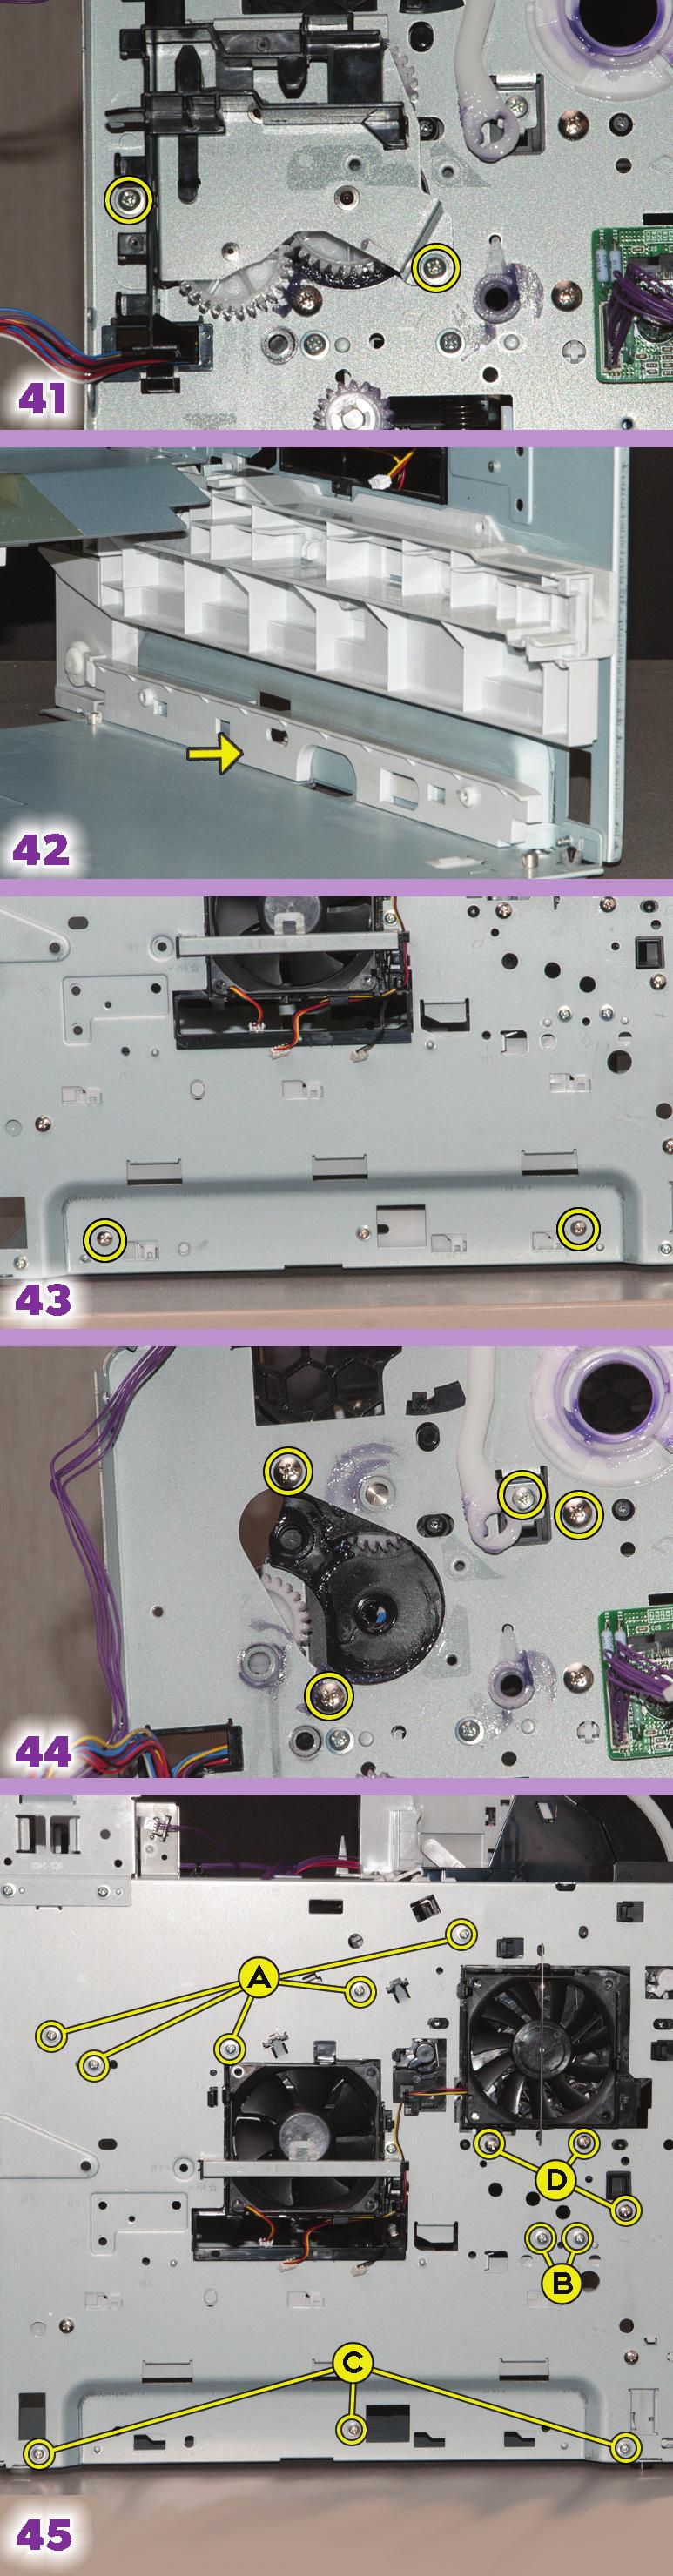 SERVICE EDGE, SUMMER 2014 10 to four screws on the other side (Fig. 14). Now grasp the power supply from behind, lift it slightly, and slide it out the back of the printer (Fig. 18).